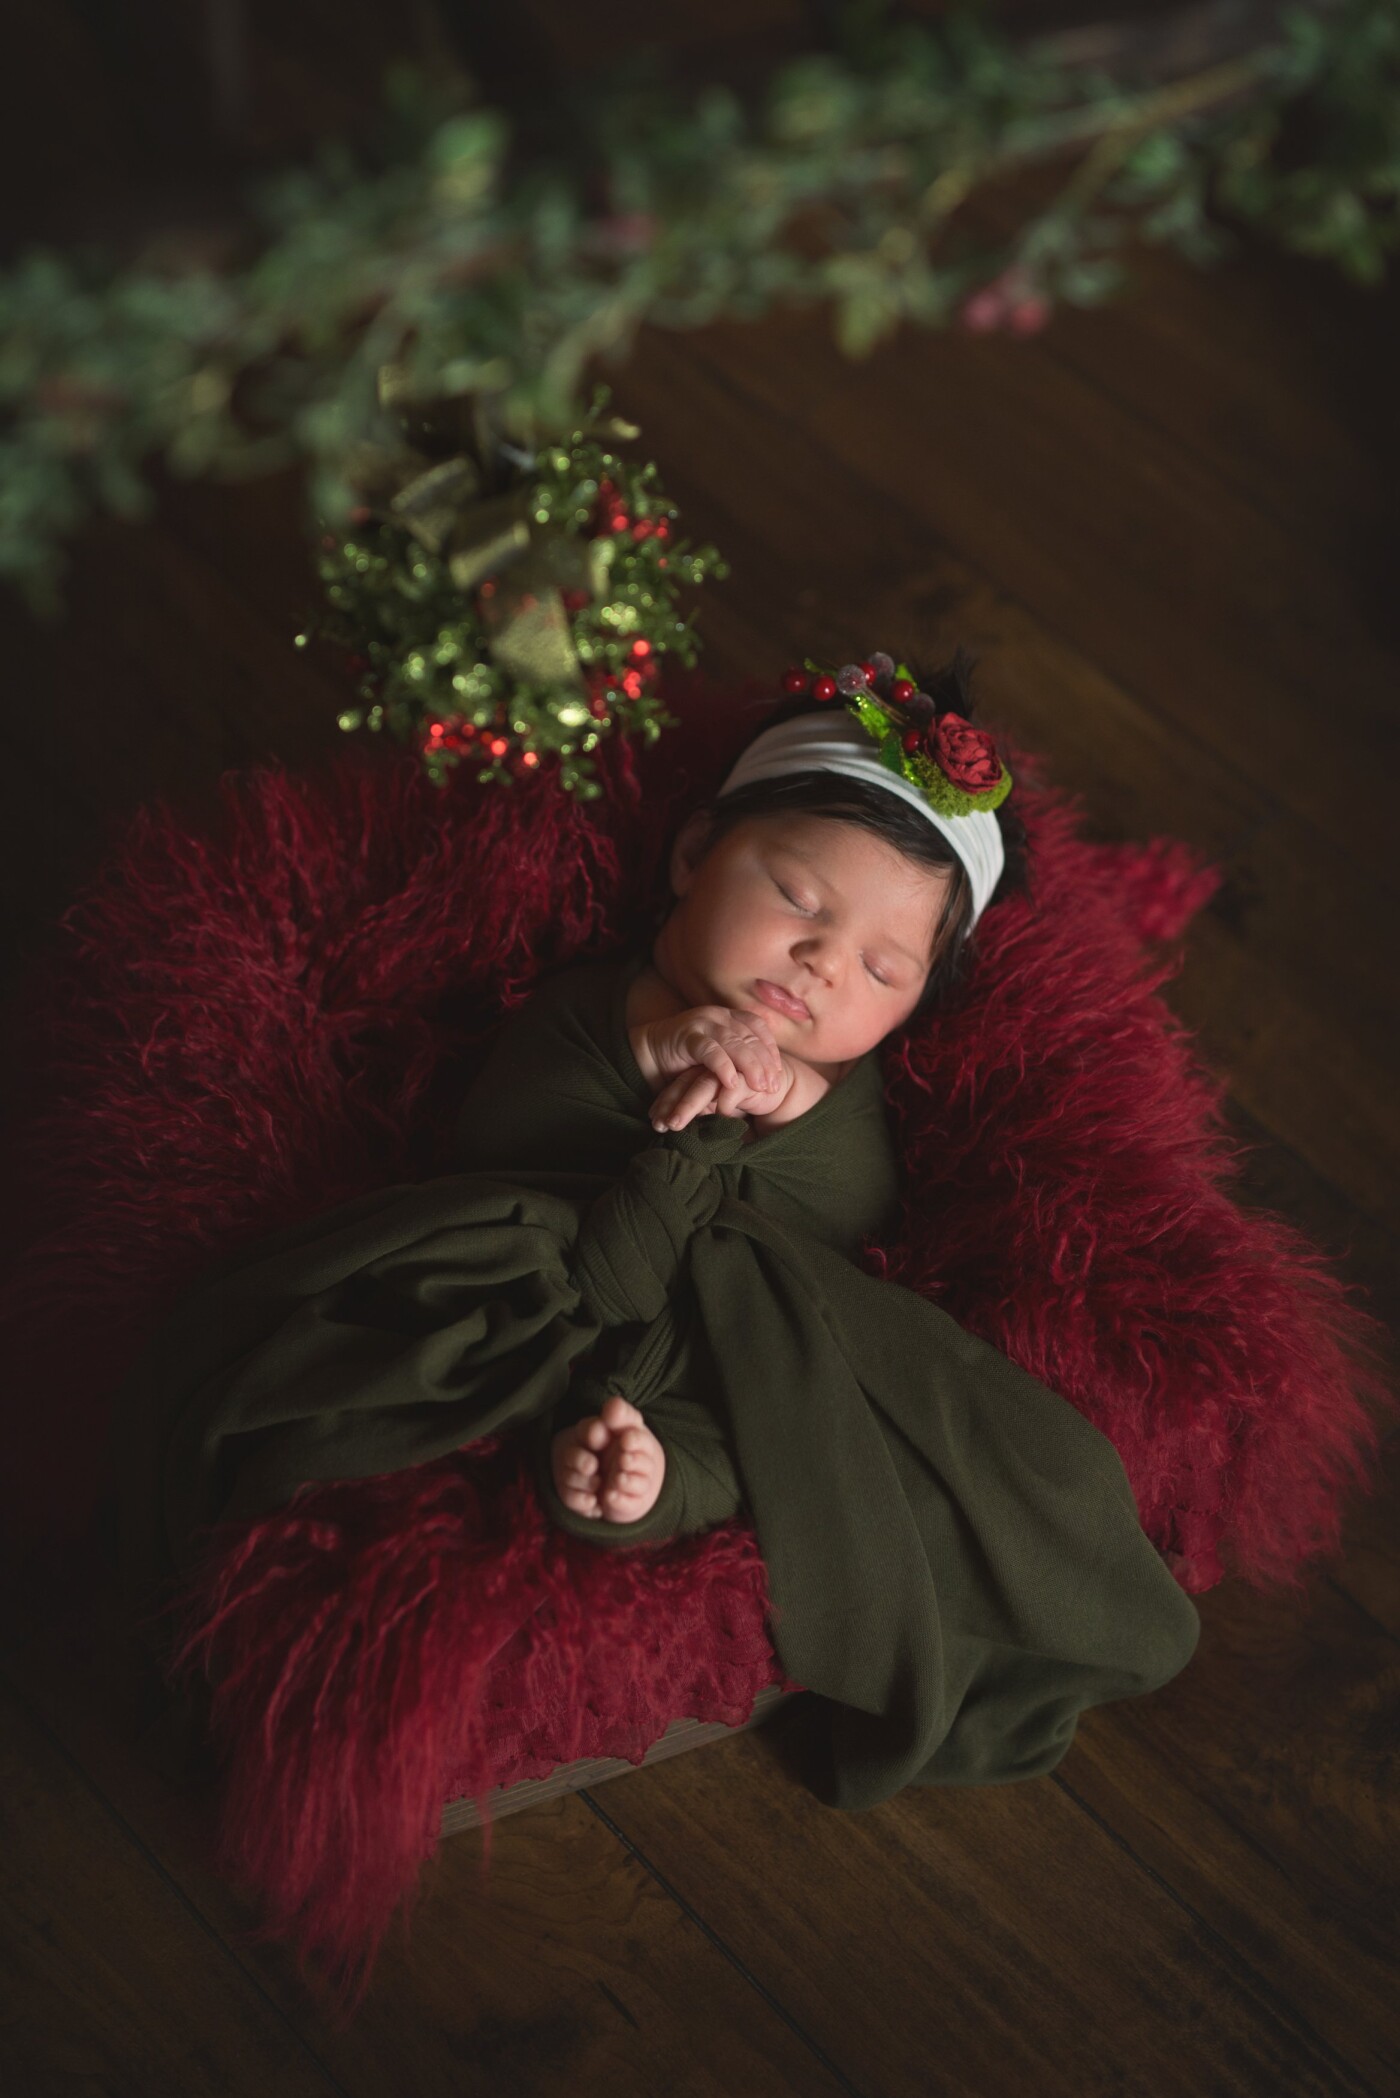 First holiday photo of this sweet little girl in my new studio. She's dreaming of a Merry Christmas and all the snuggles and cuddles she is going to get for her first Christmas. What a living doll.